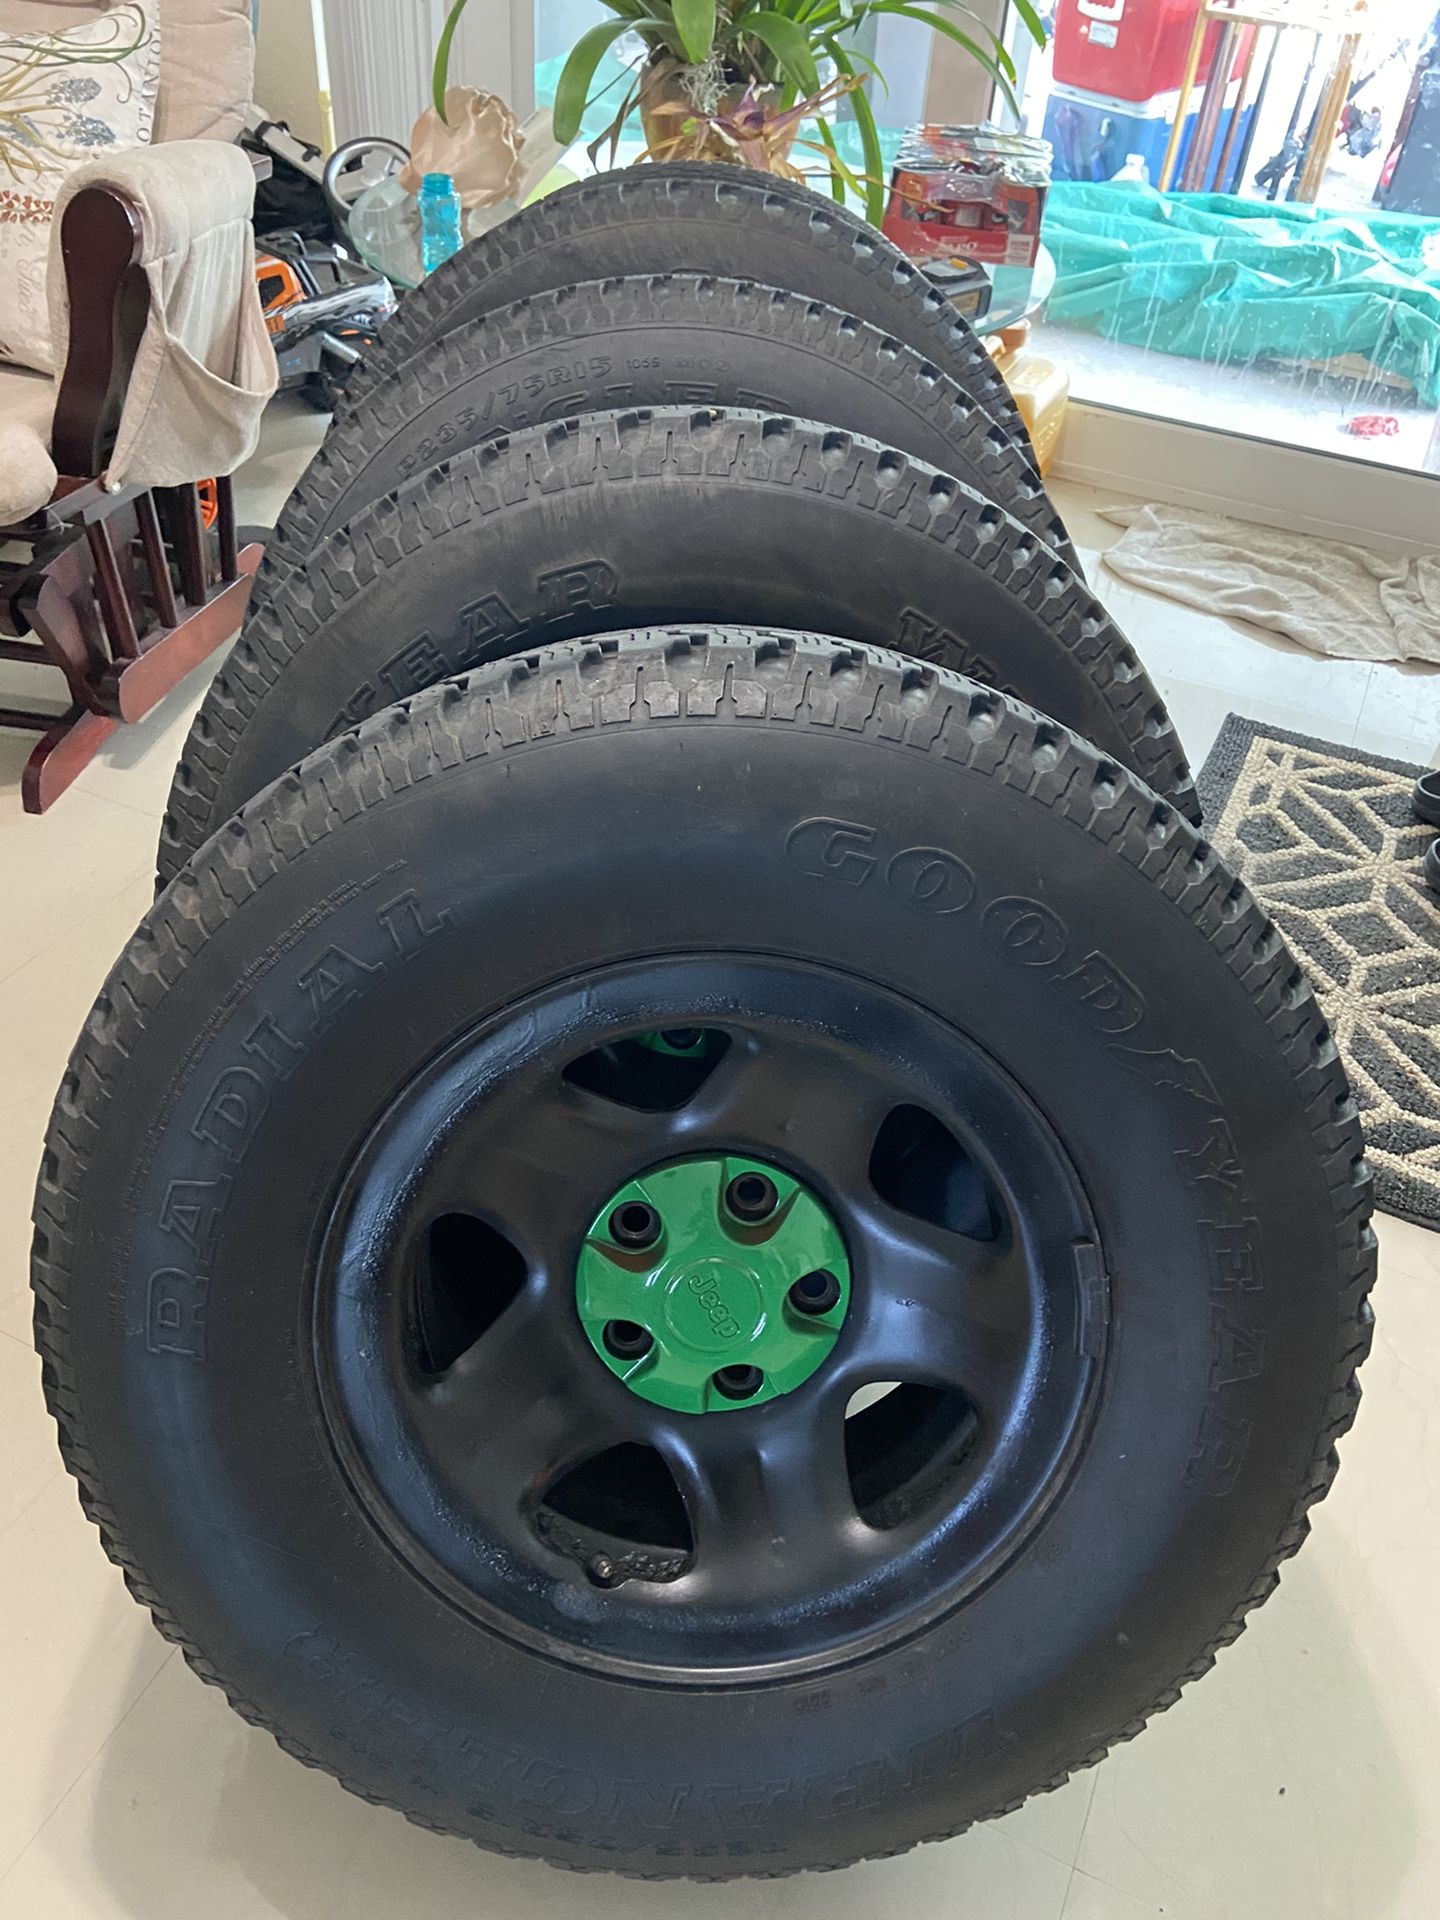 Jeep Wrangler Wheels and Tires